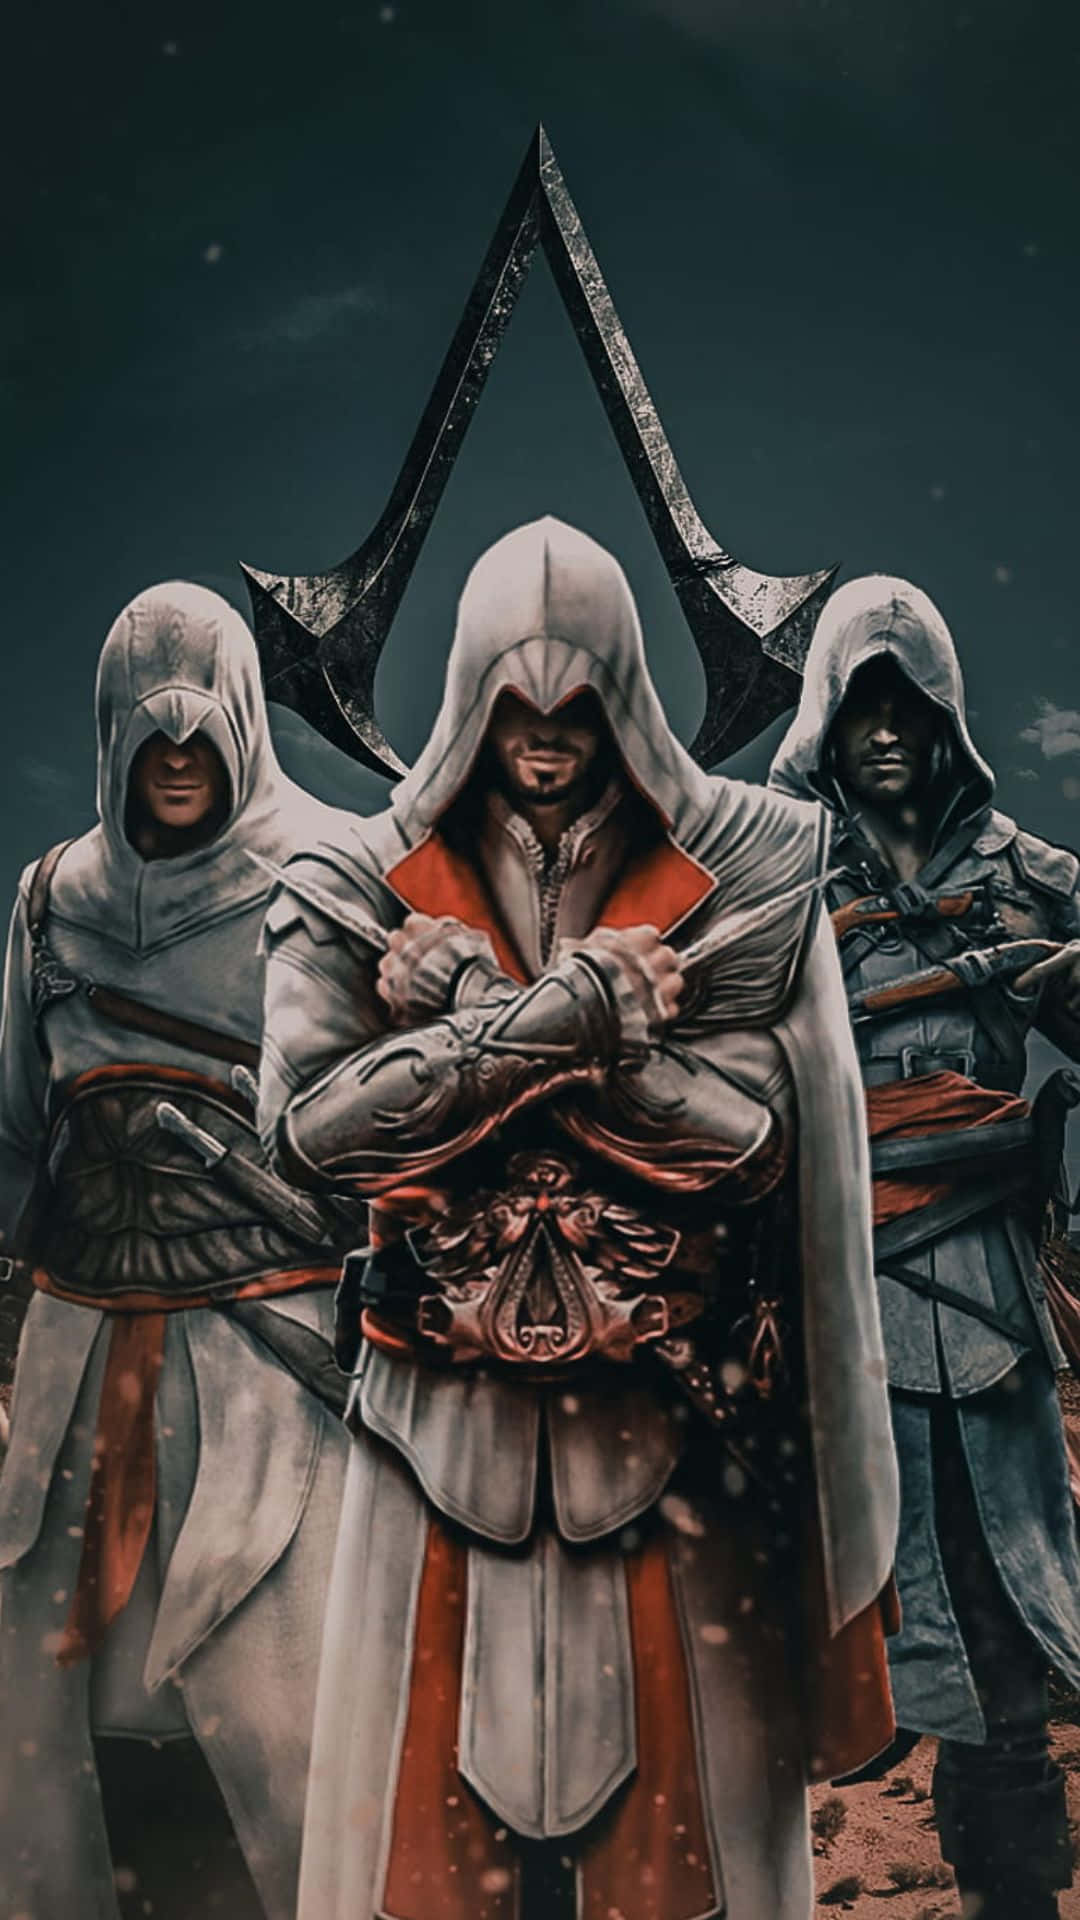 Epic Gathering of Assassin's Creed Characters Wallpaper